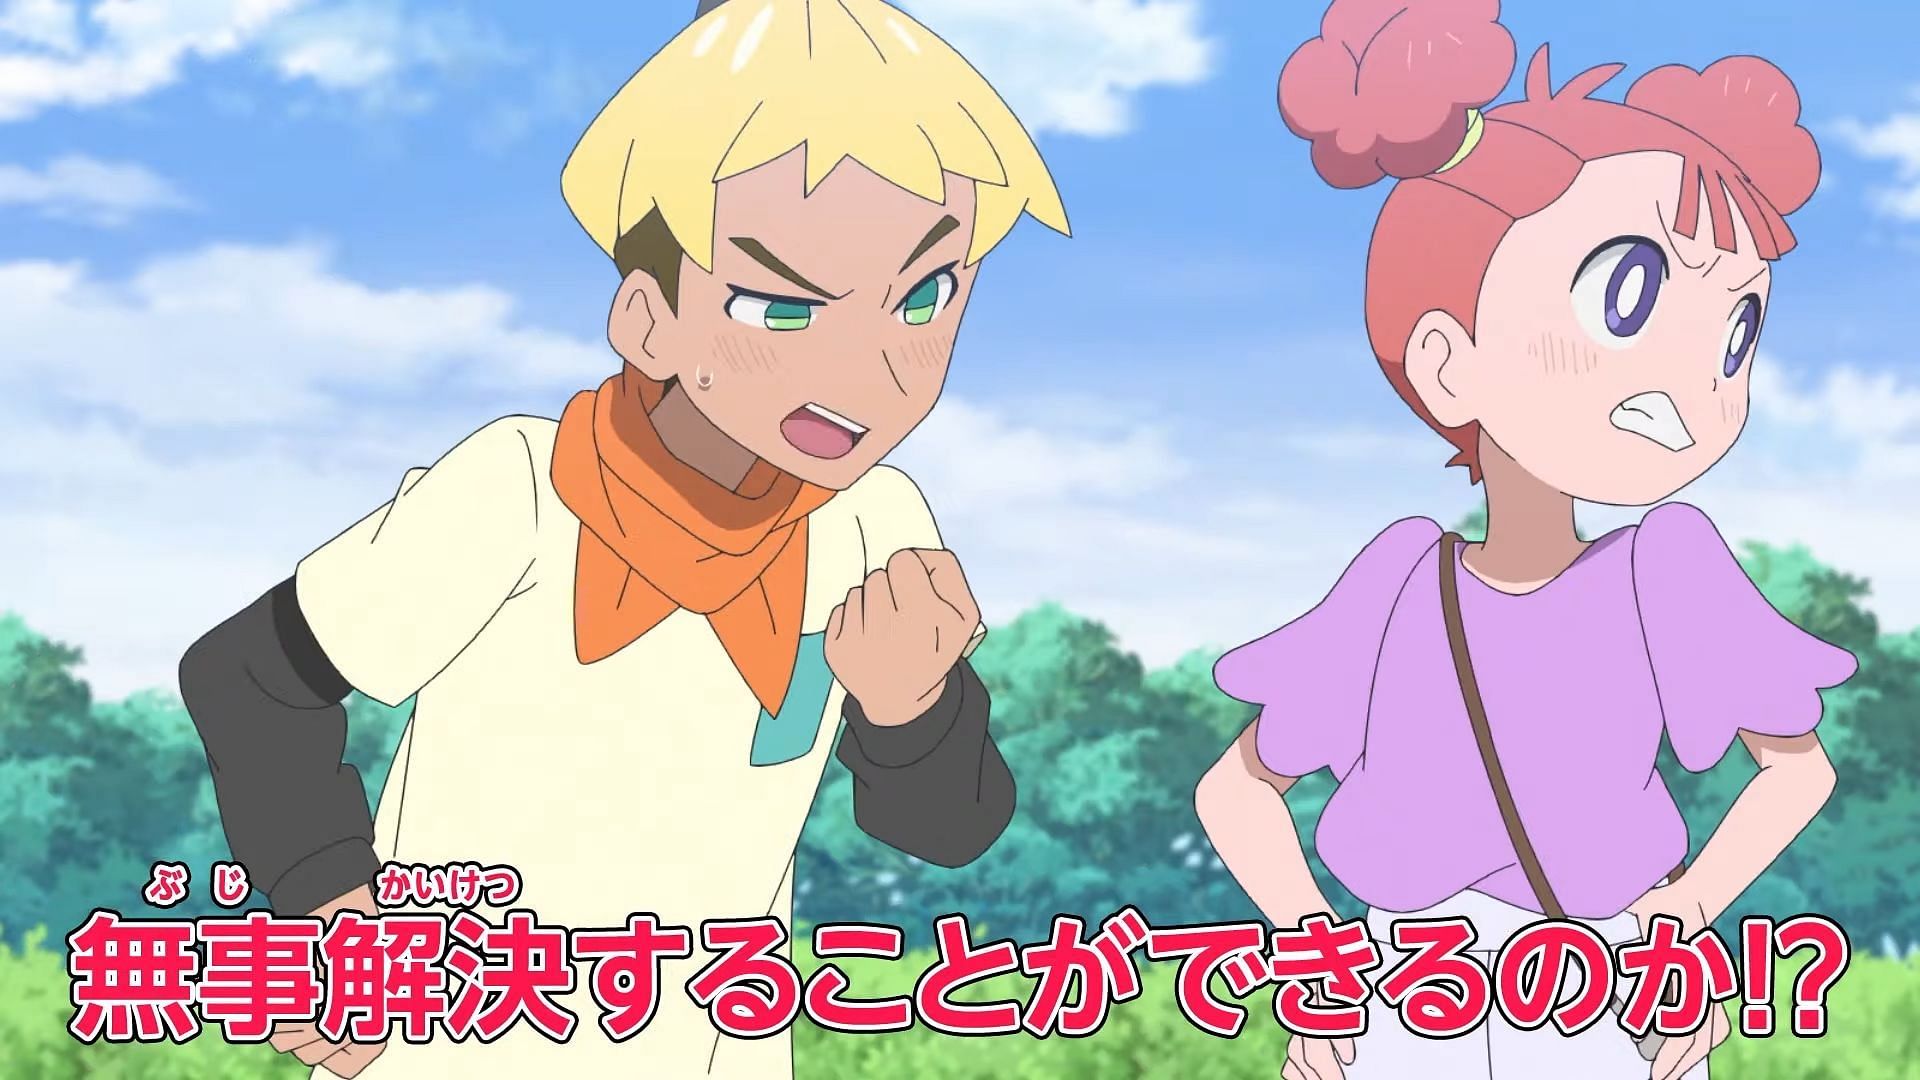 Two trainers seem to disagree about their respective Oinkologne in Pokemon Horizons Episode 36 (Image via The Pokemon Company)